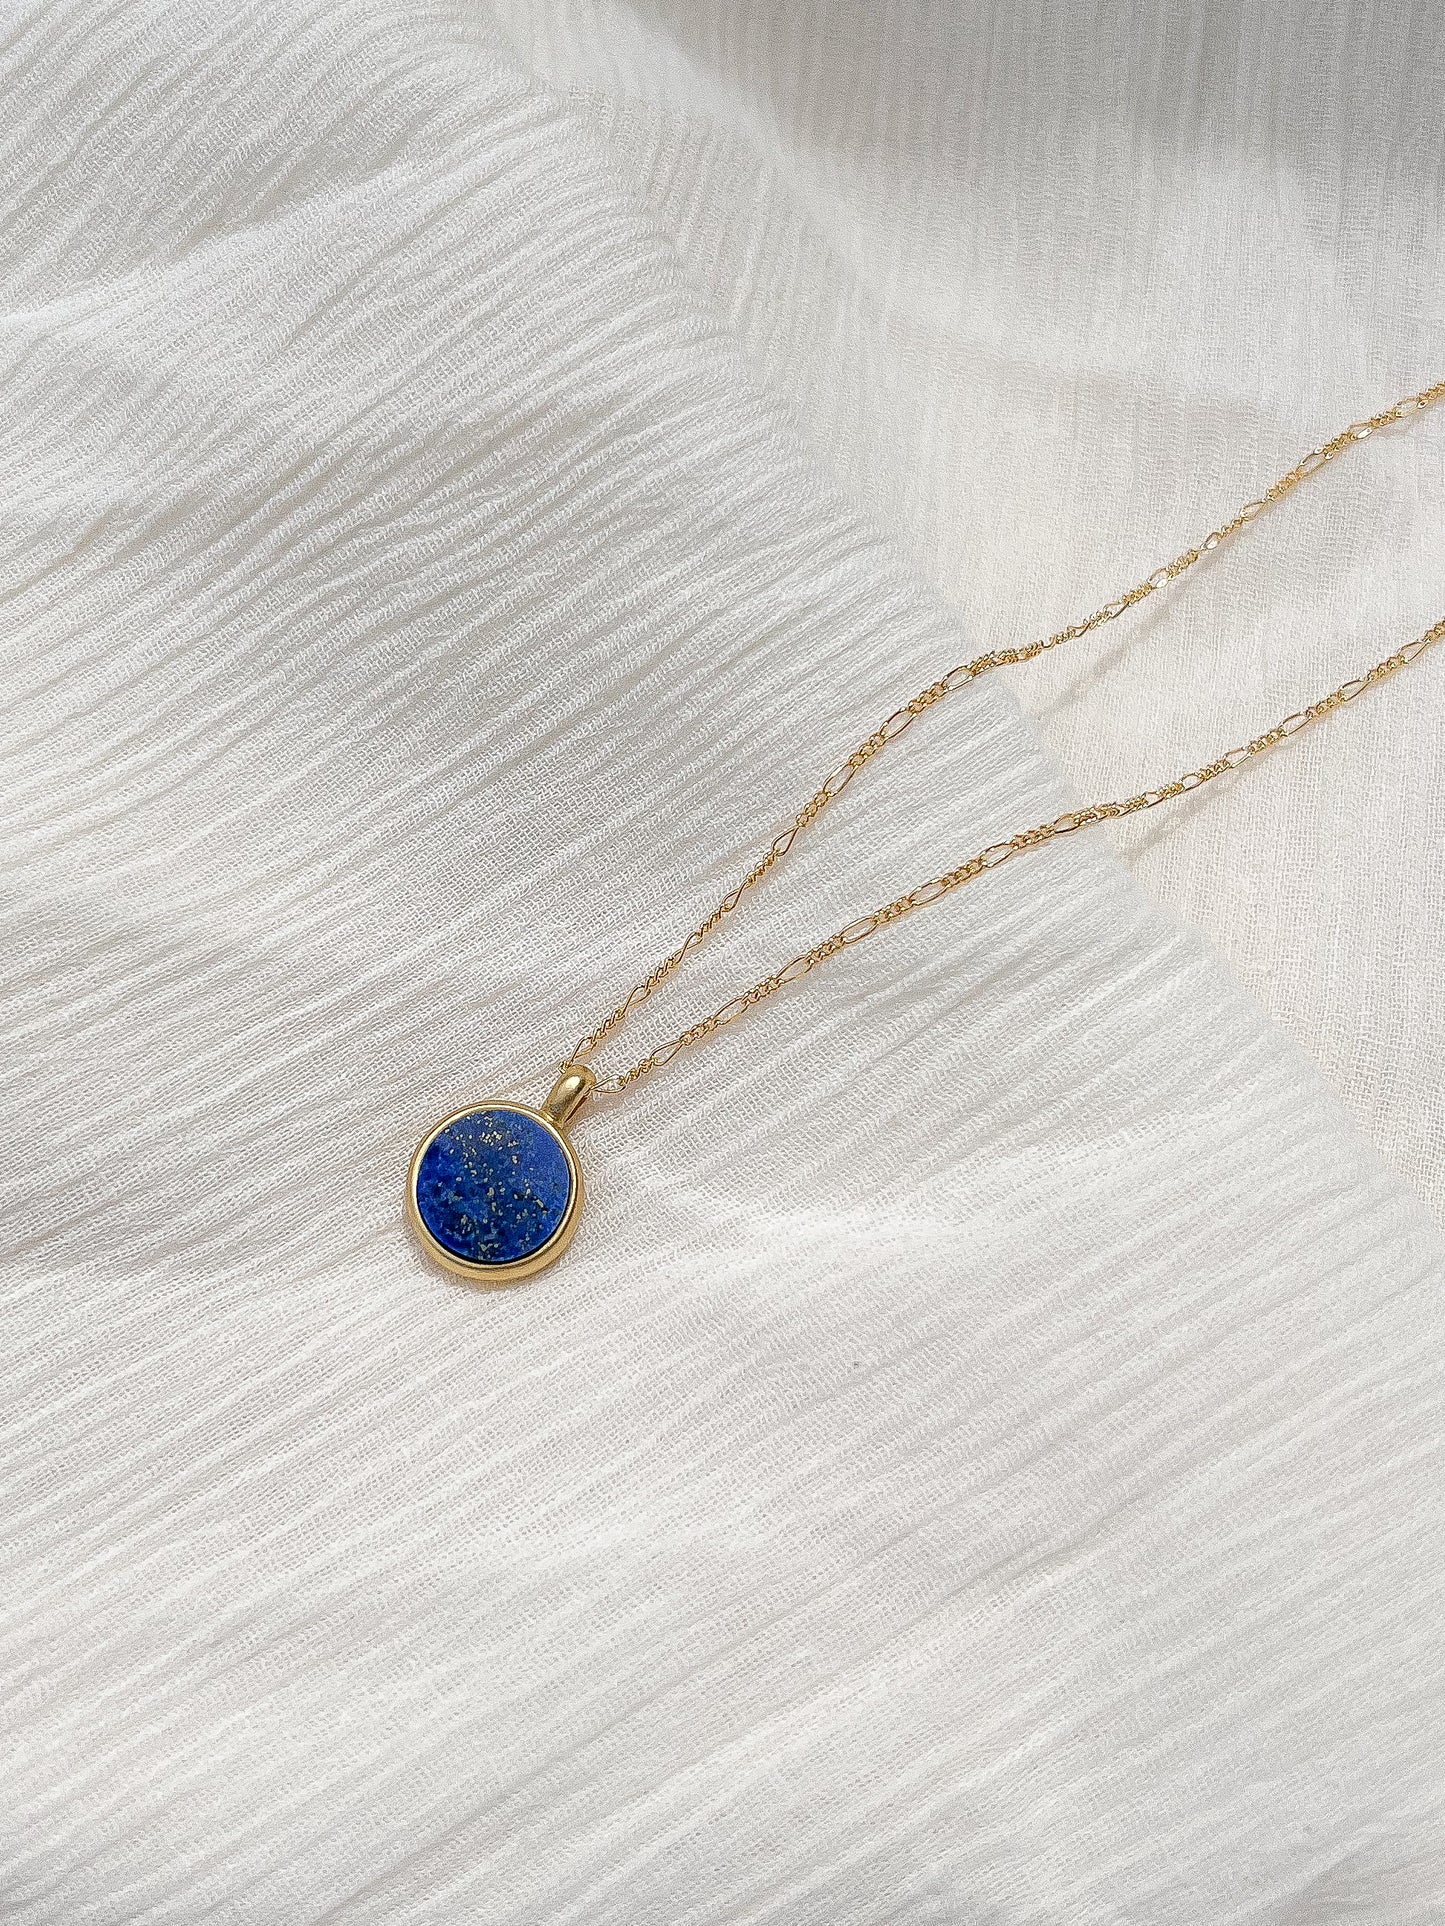 Handmade stone necklace featuring ethically sourced stones on gold-fill or sterling silver, sturdy figaro chain. These are heirloom pieces to hand down